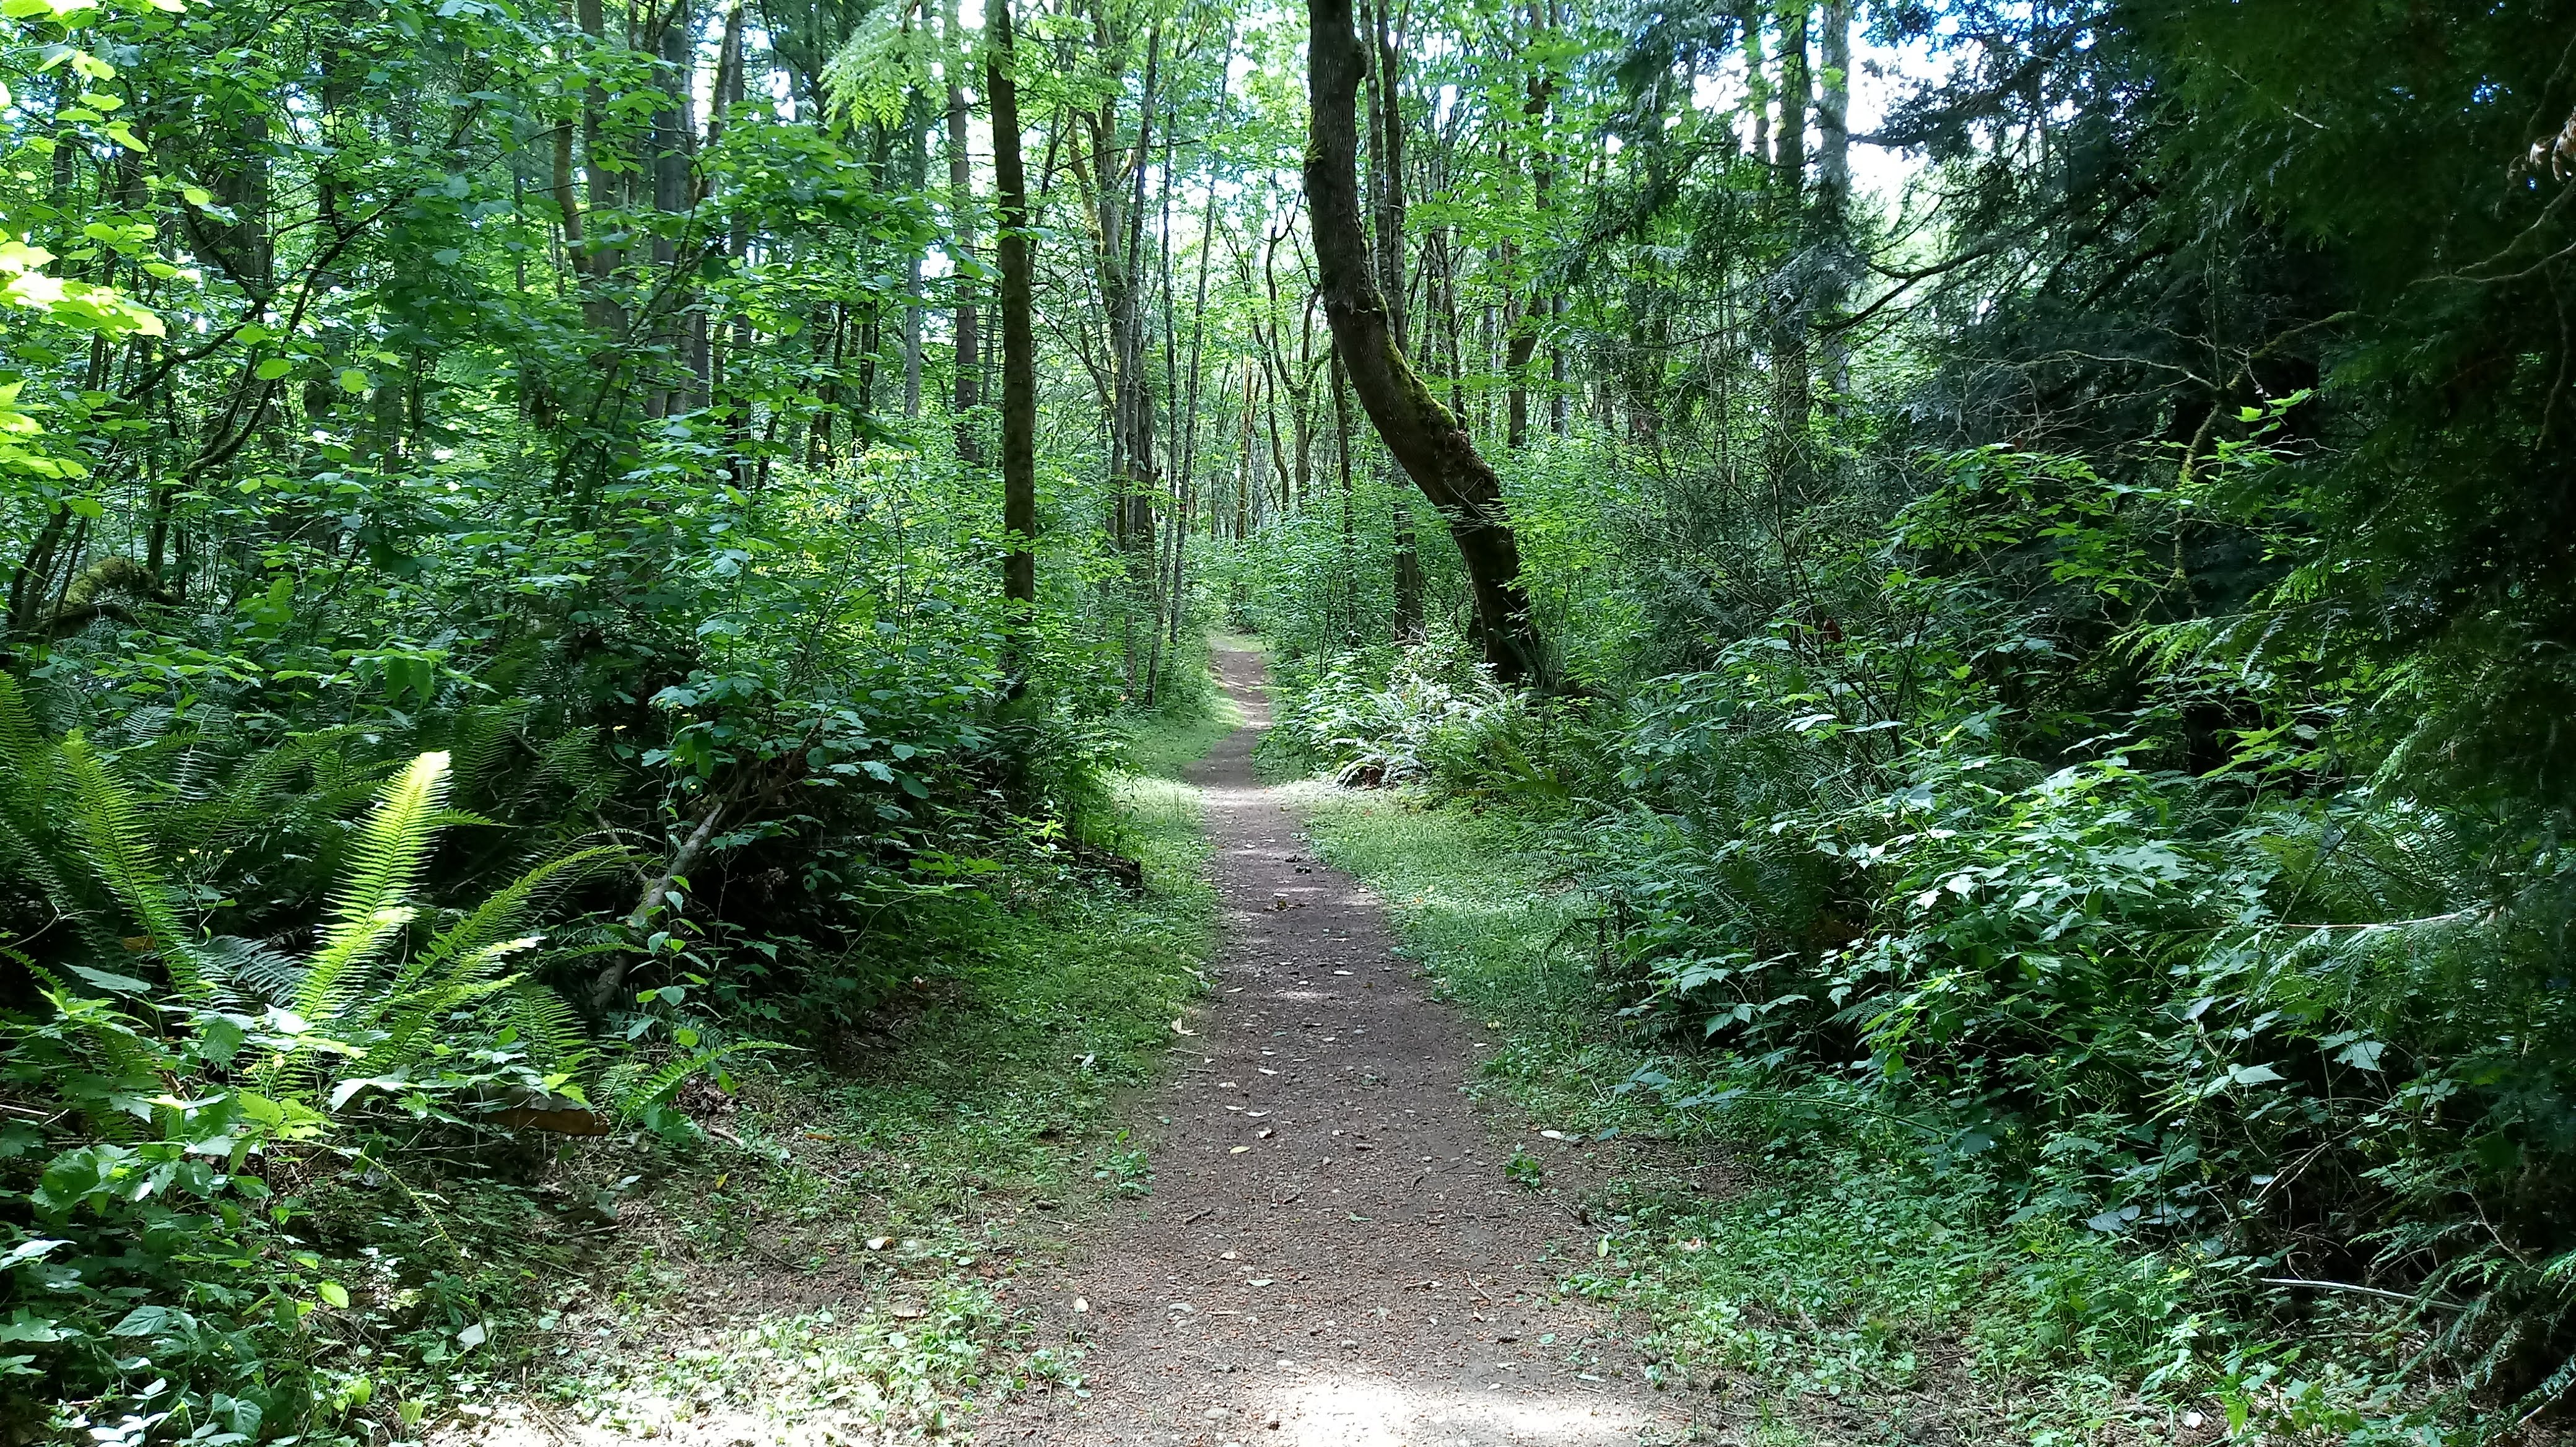 ../images/trails/highlands_north//Trail in the woods between 140th Ave SE and SE 87th Pl.jpg